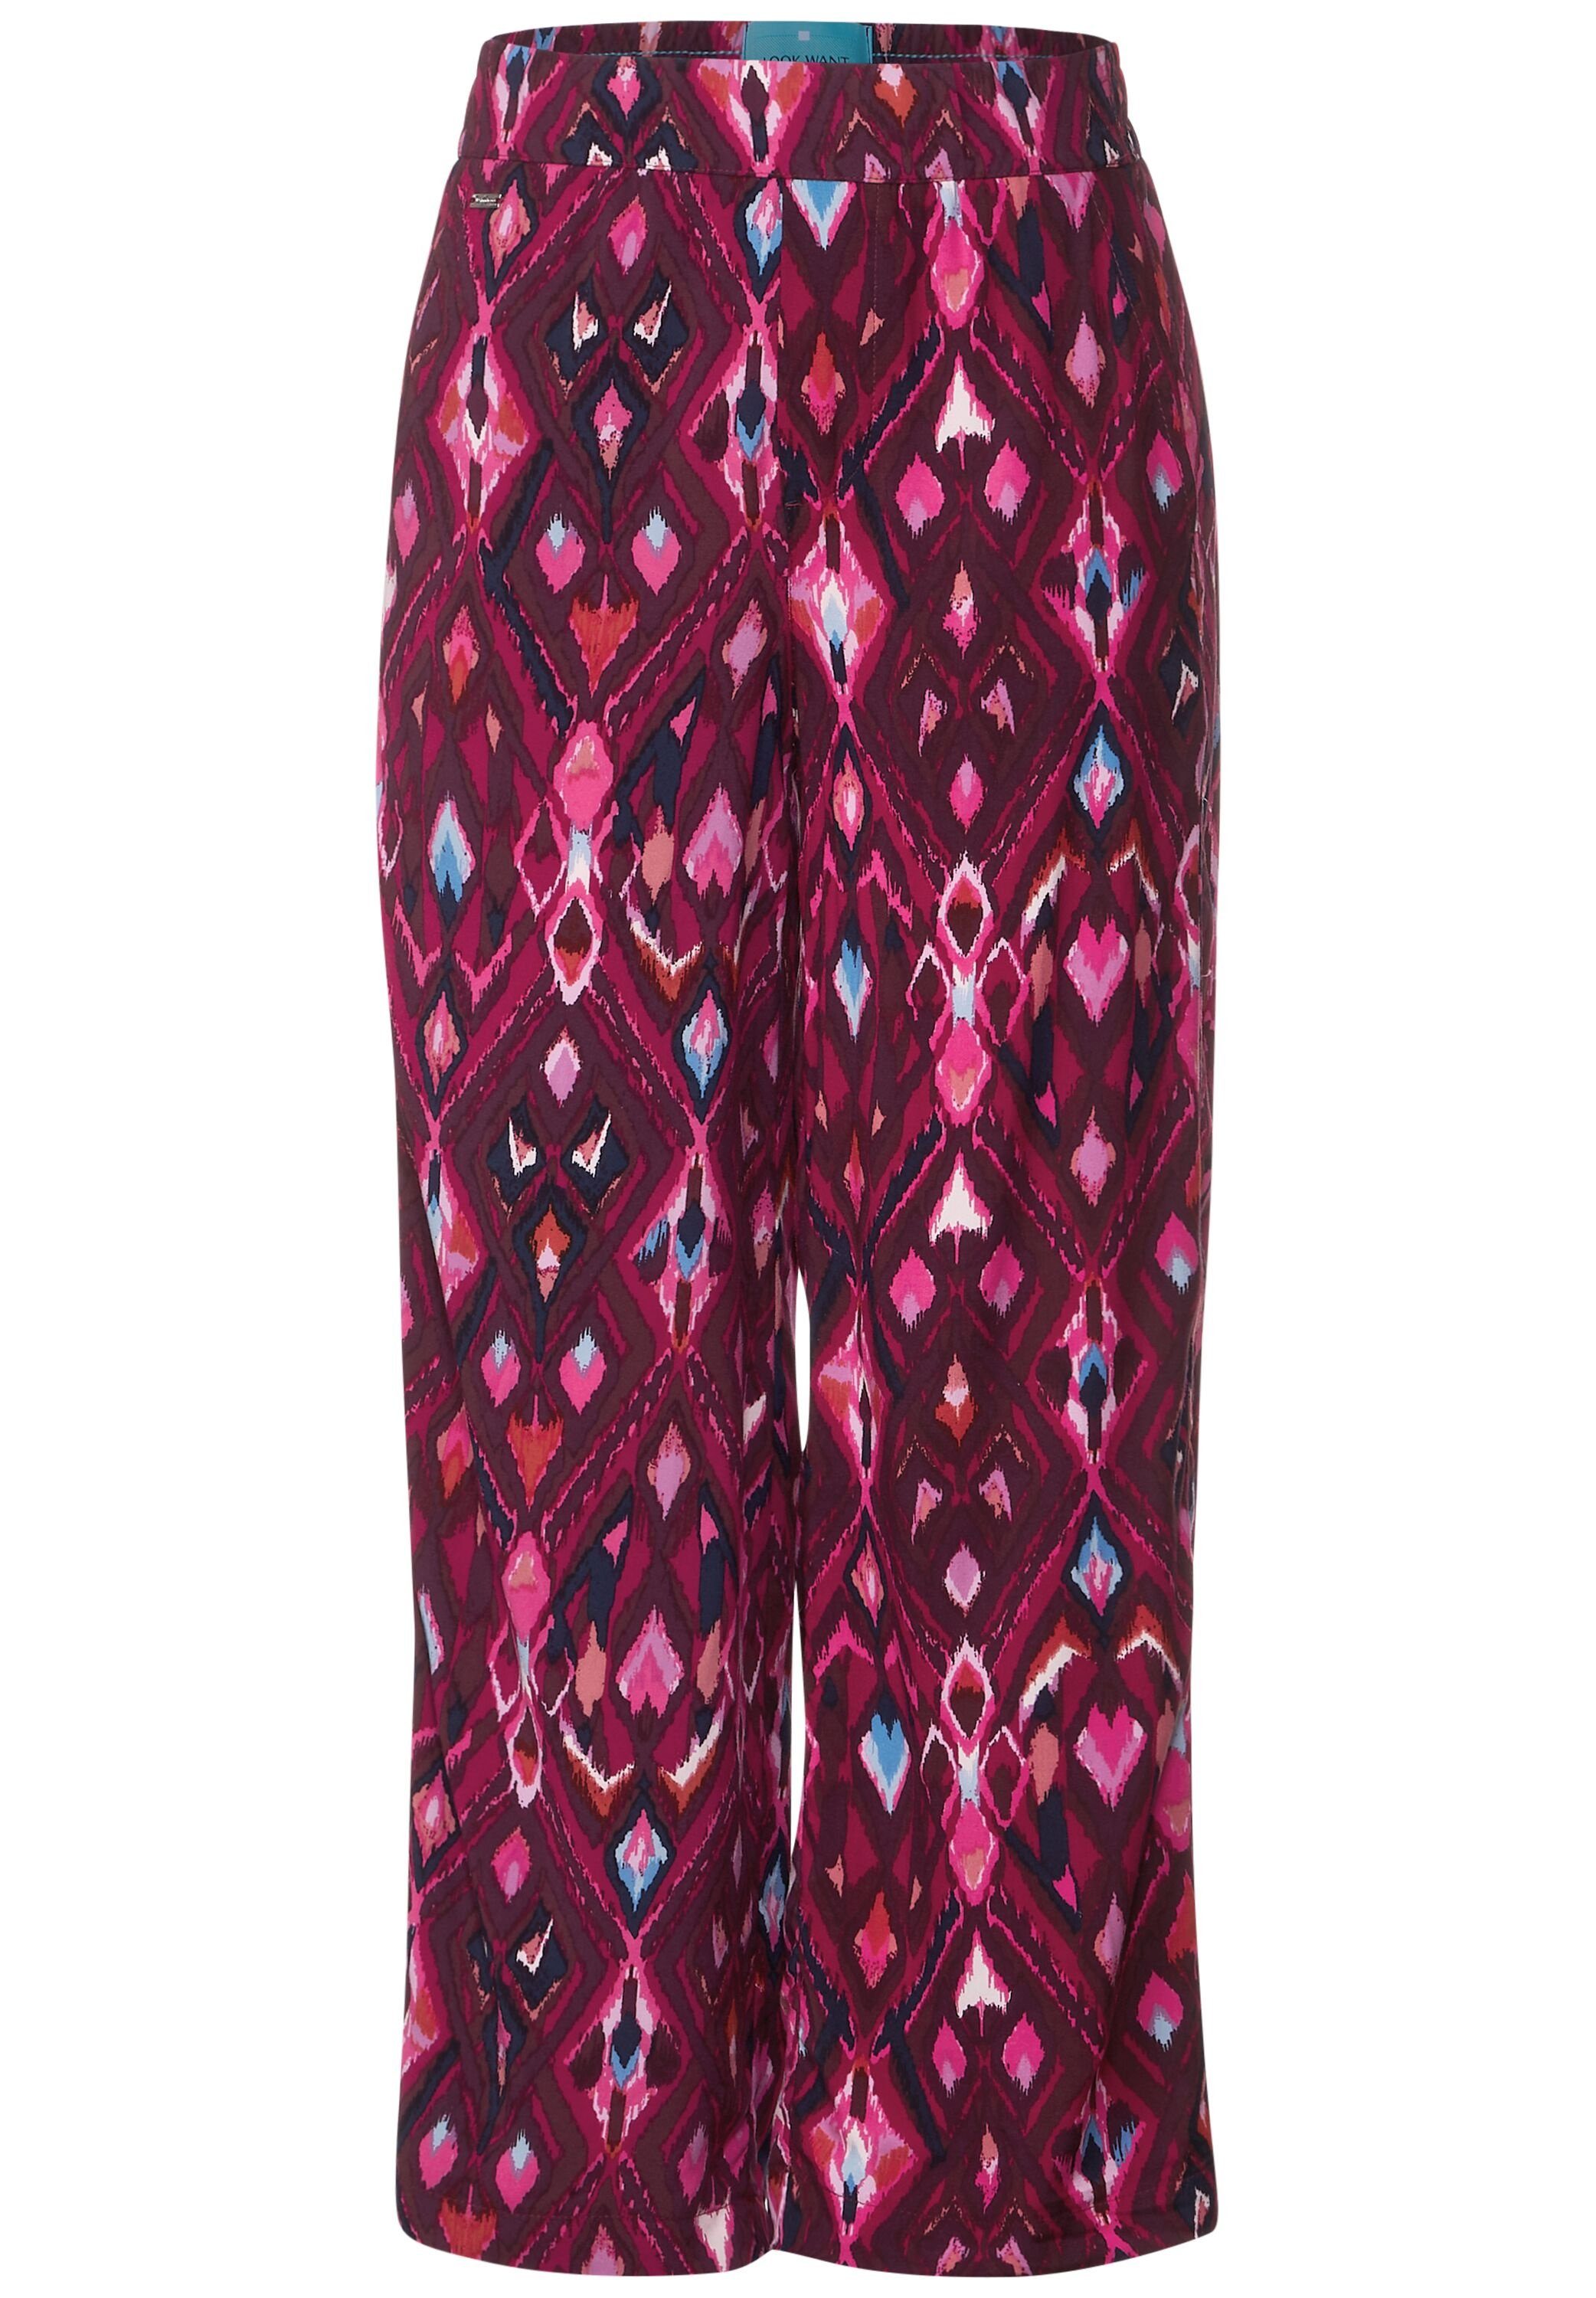 STREET ONE Stoffhose Loose Fit Hose mit Ikatprint tamed berry